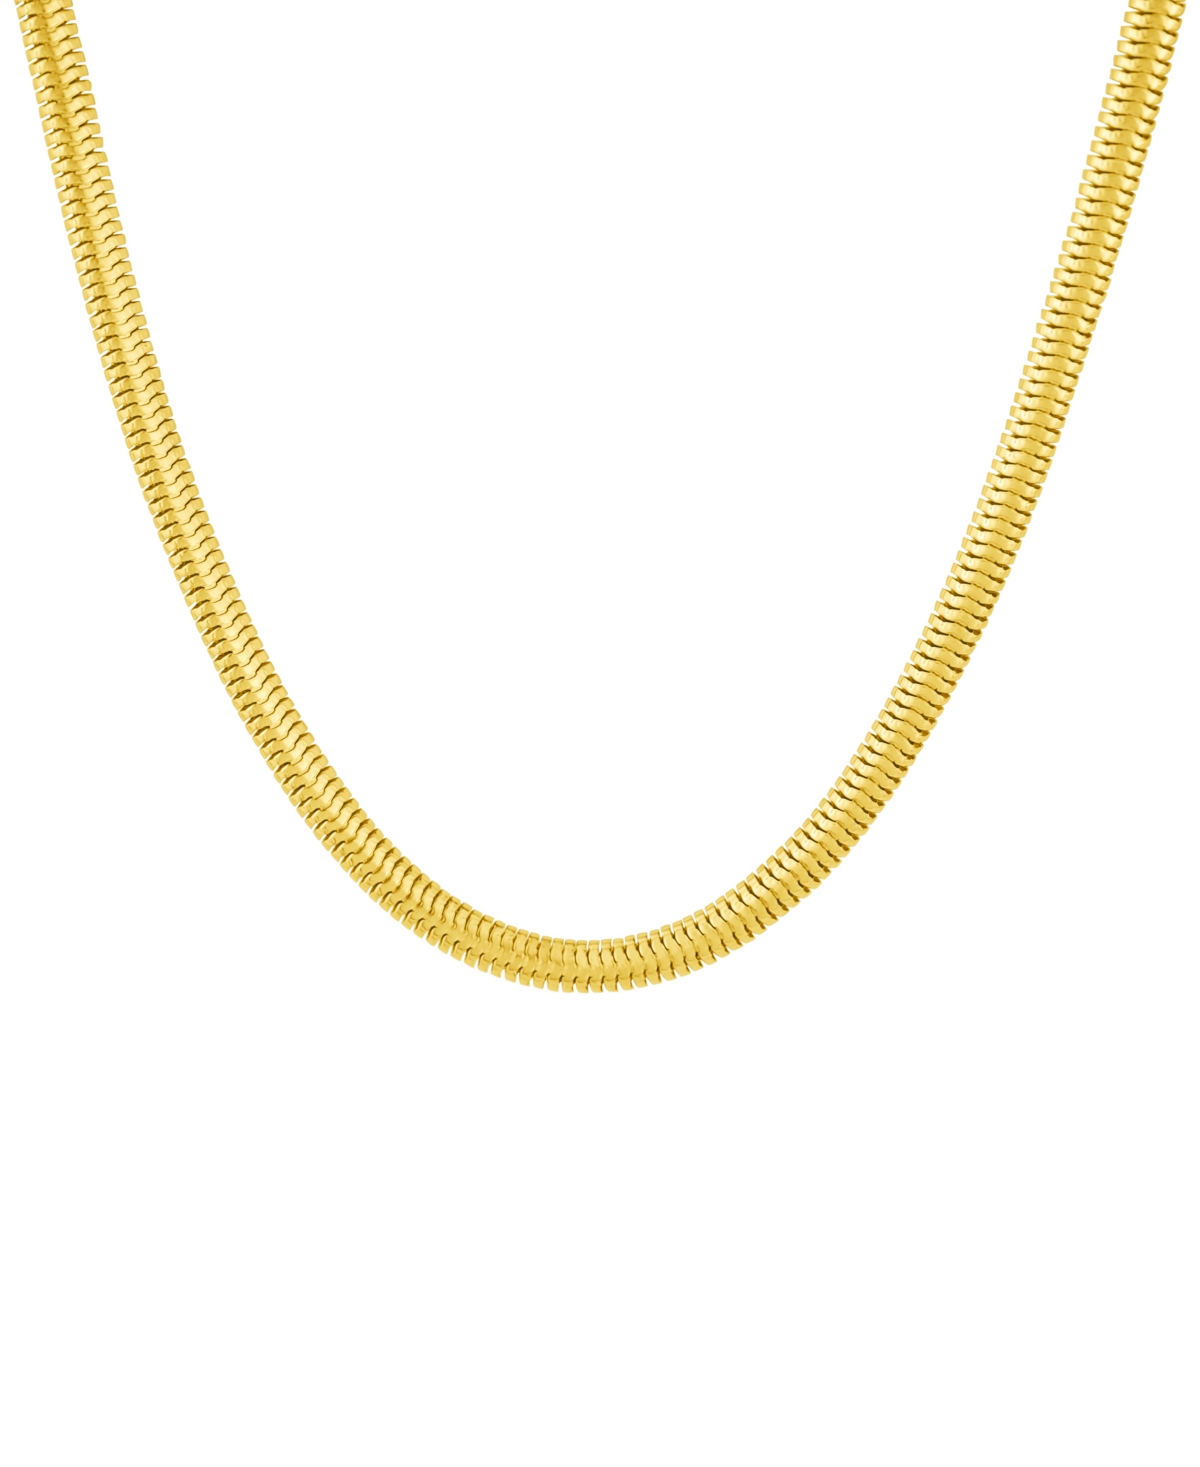 Snake Chain Necklace in 18K Gold Plated Brass - K Gold Plated